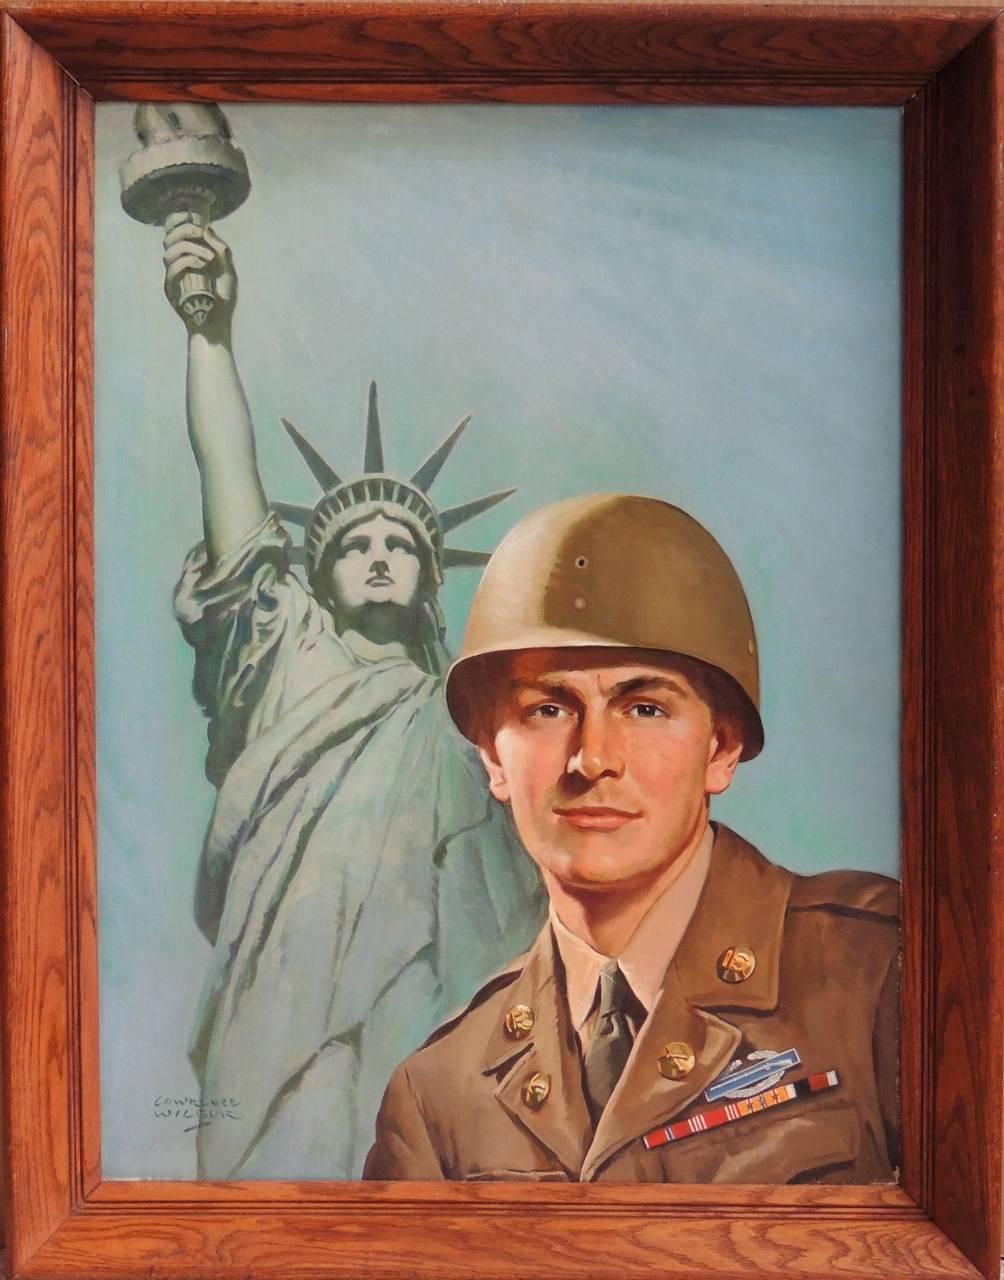 Military Illustration - Painting by Lawrence Wilbur